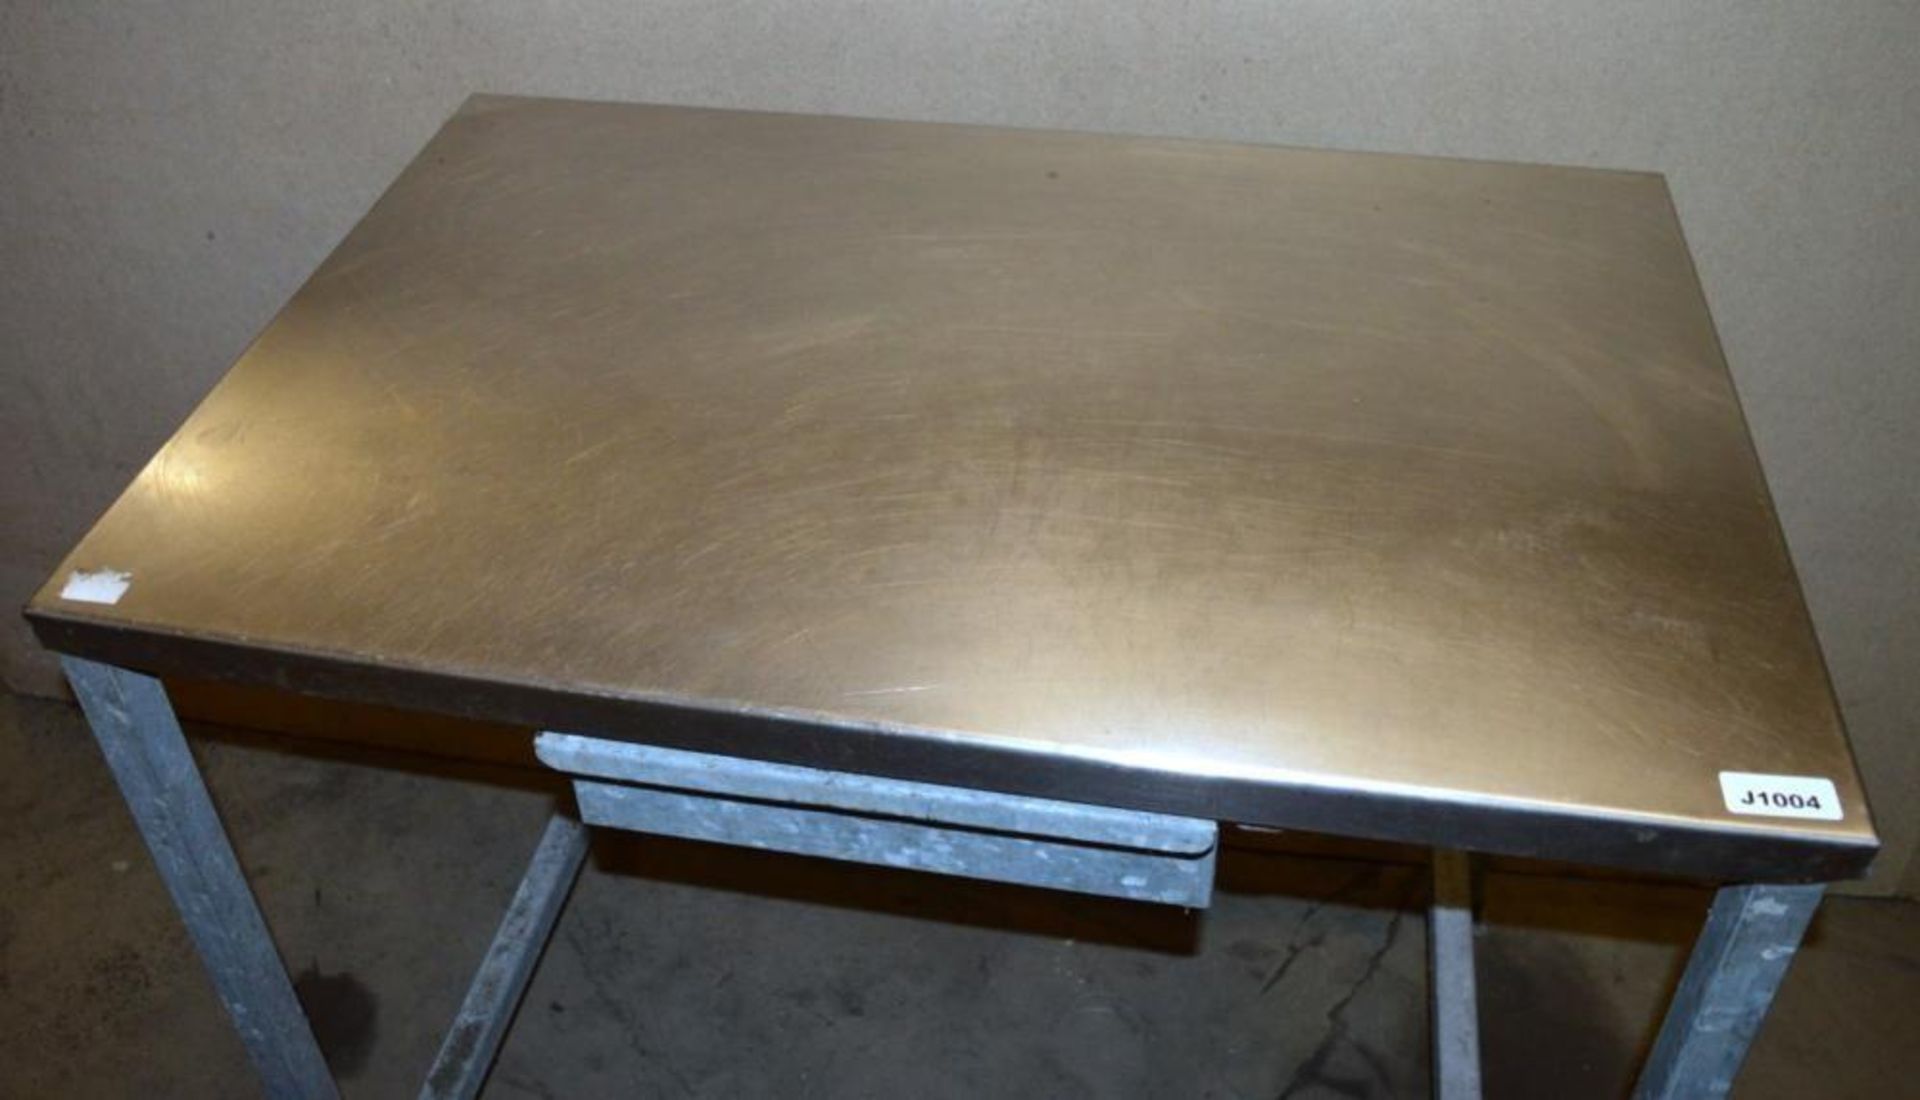 1 x Preperation Table With Stainless Steel Surface and Integral Drawer - H84 x W91 x D60 cms - CL282 - Image 2 of 3